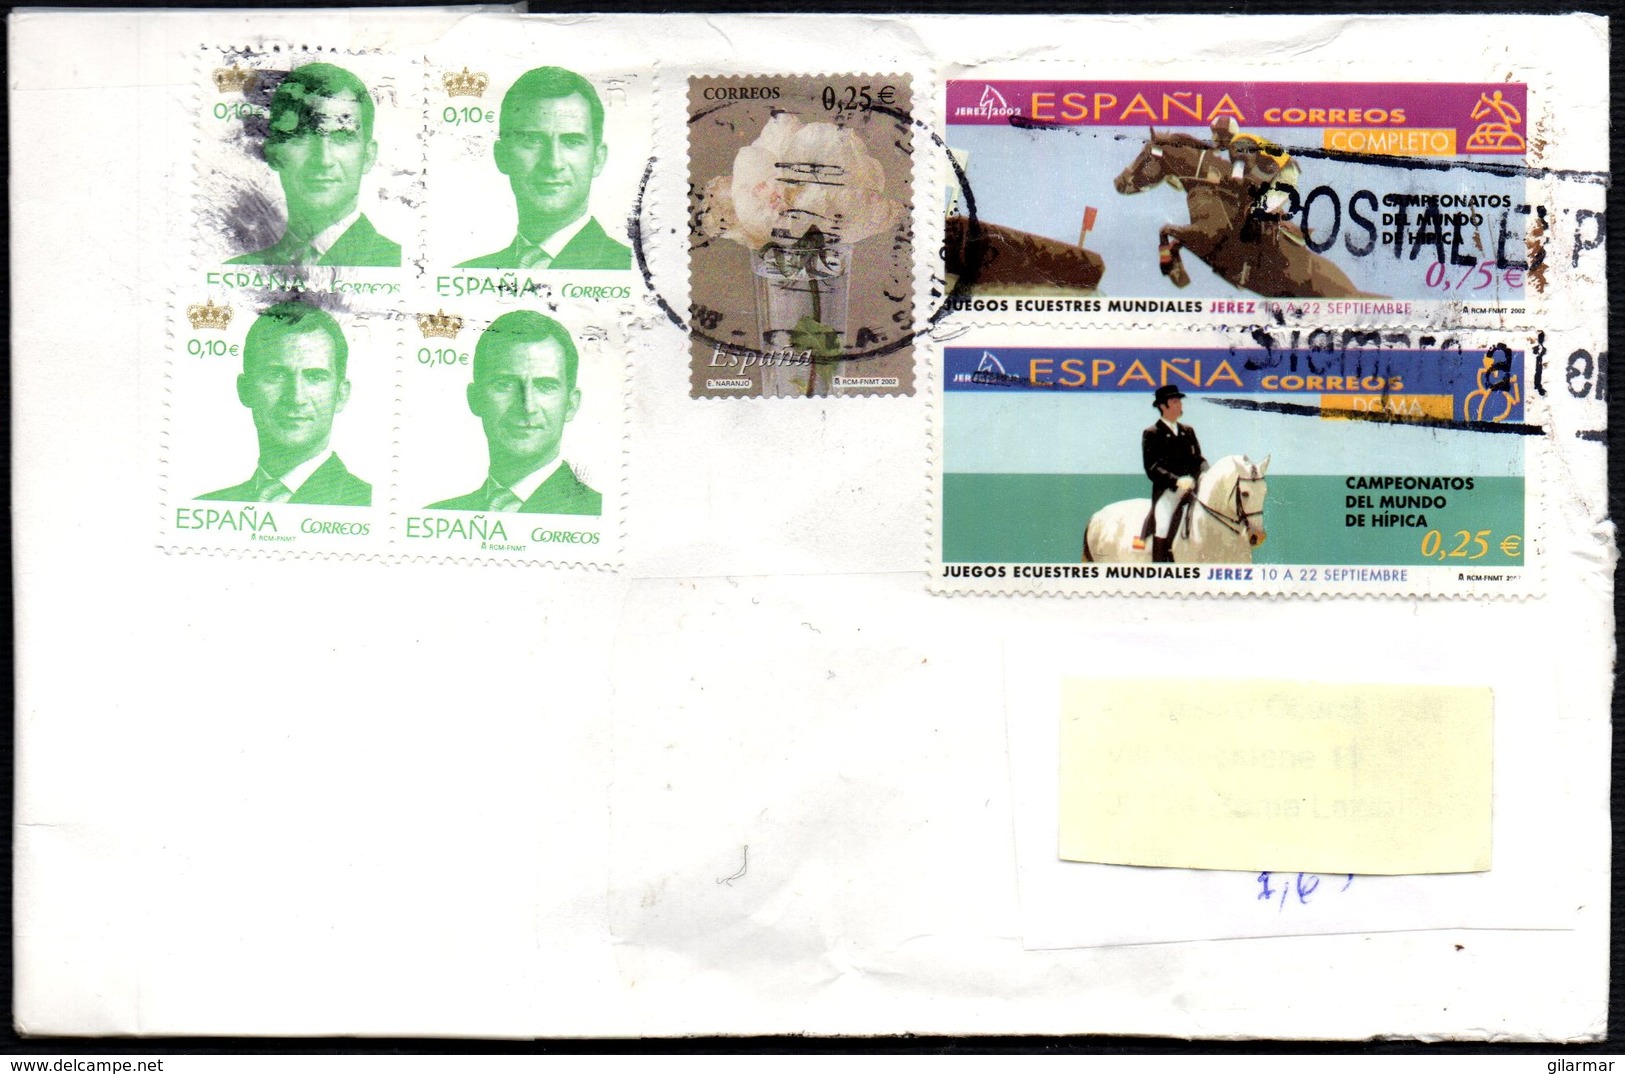 SPAIN 2002 - MAILED ENVELOPE - WORLD EQUESTRIAN GAMES JEREZ 2002 / FLOWERS - Ippica